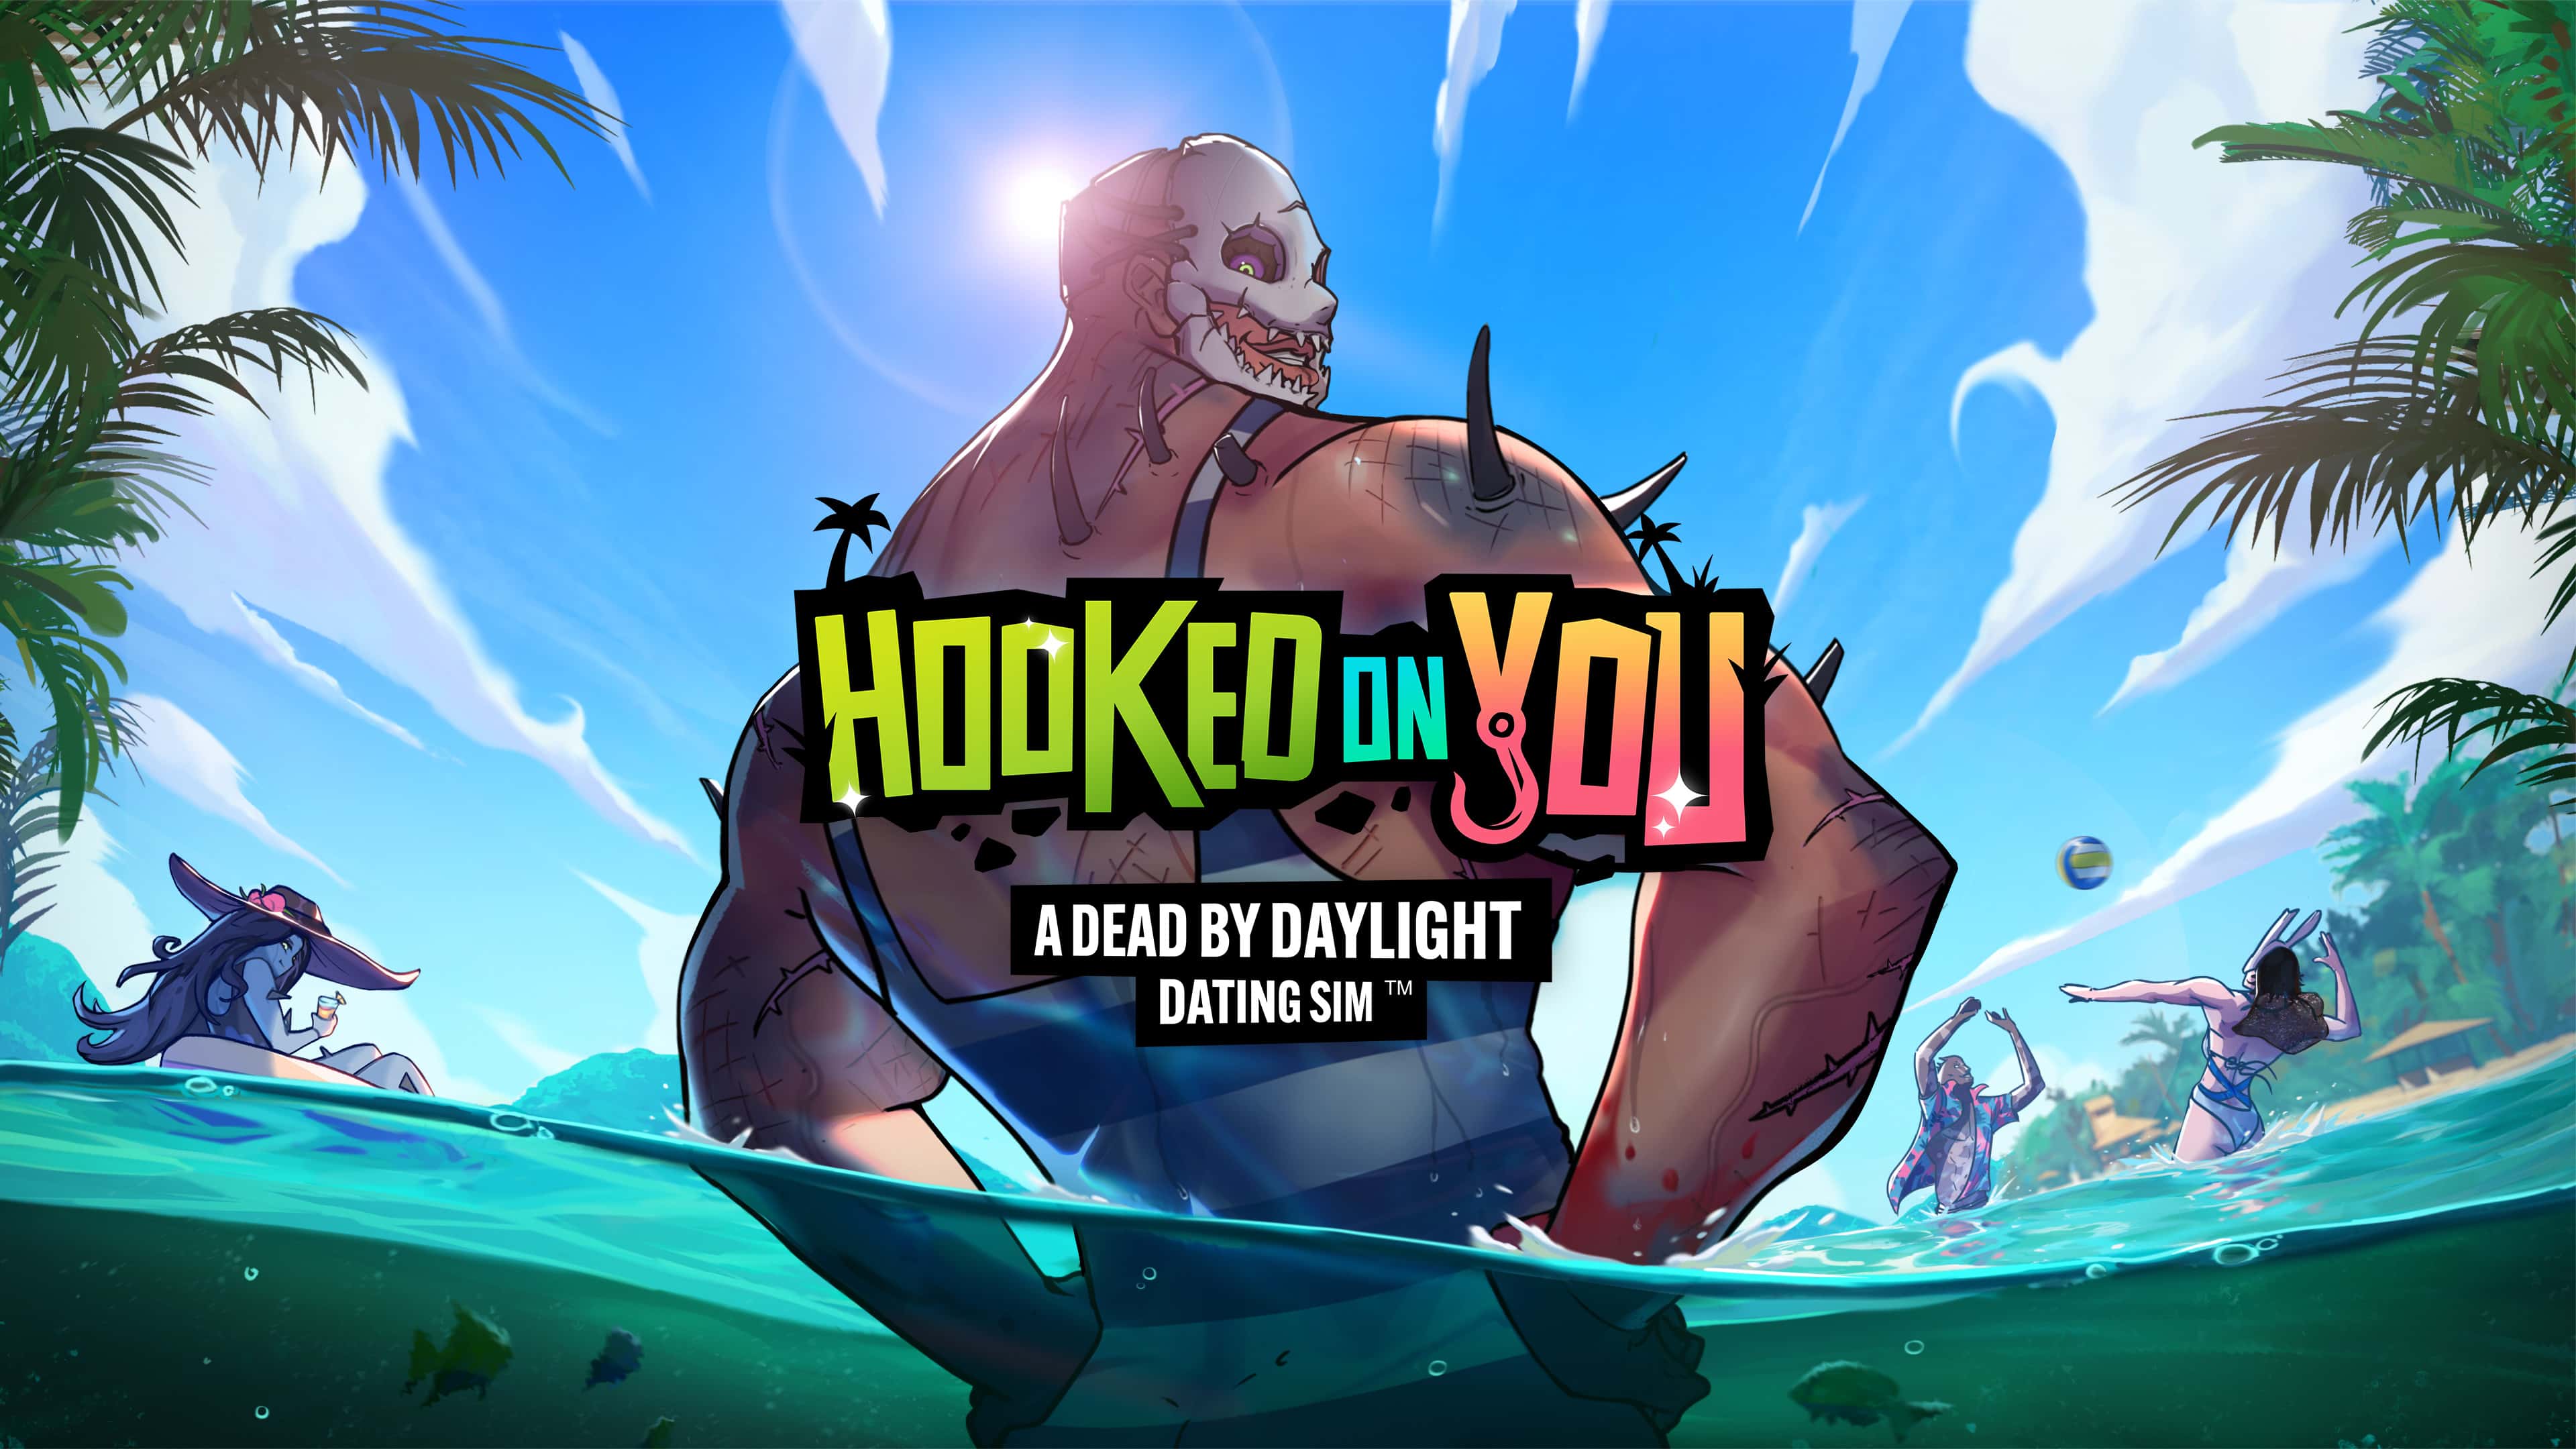 Hooked on You: A Dead by Daylight Dating Sim to release this summer -  Gayming Magazine